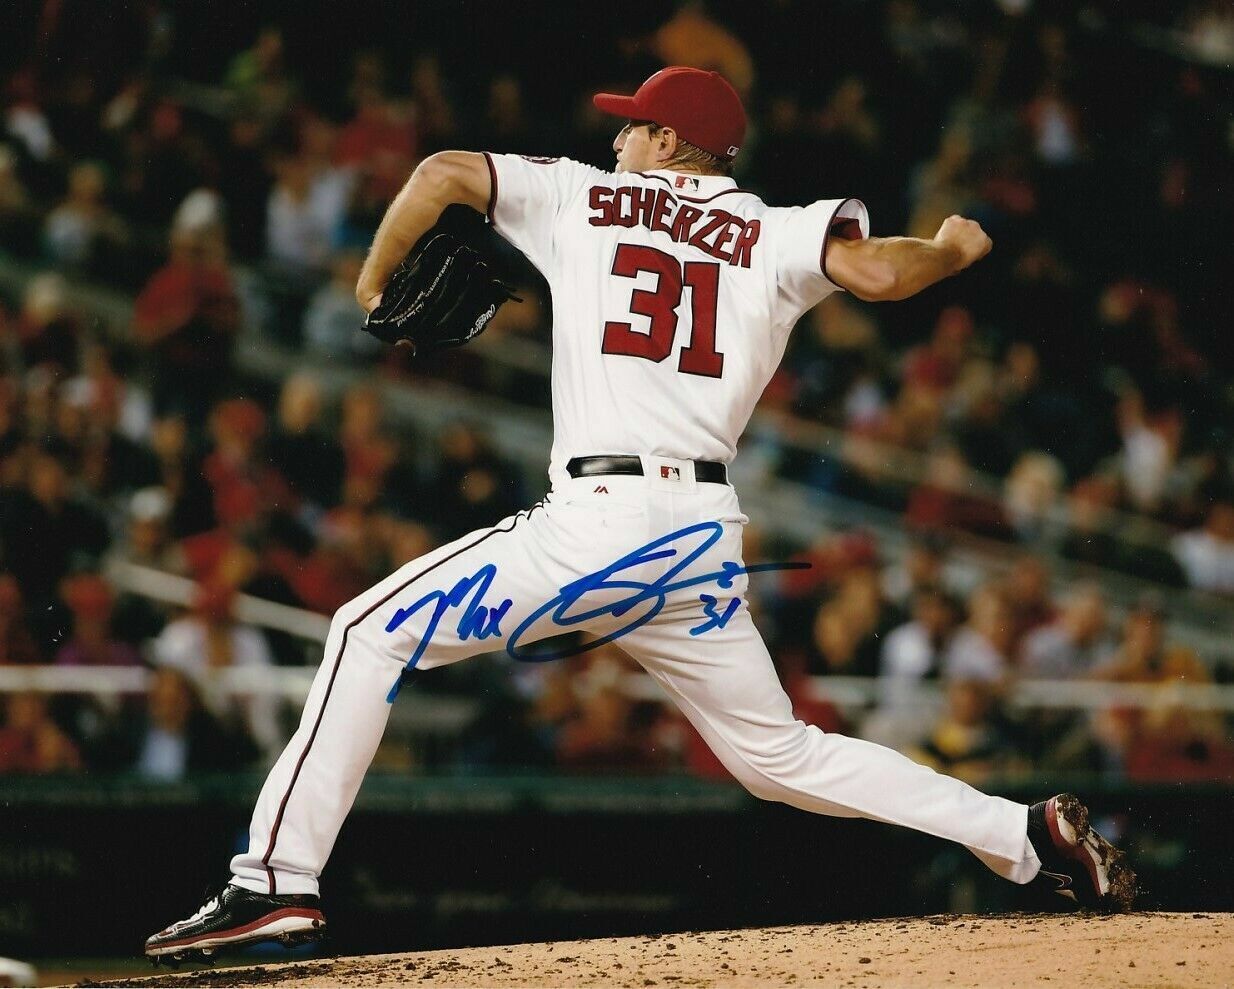 Max Scherzer Autographed Signed 8x10 Photo Poster painting ( Nationals ) REPRINT